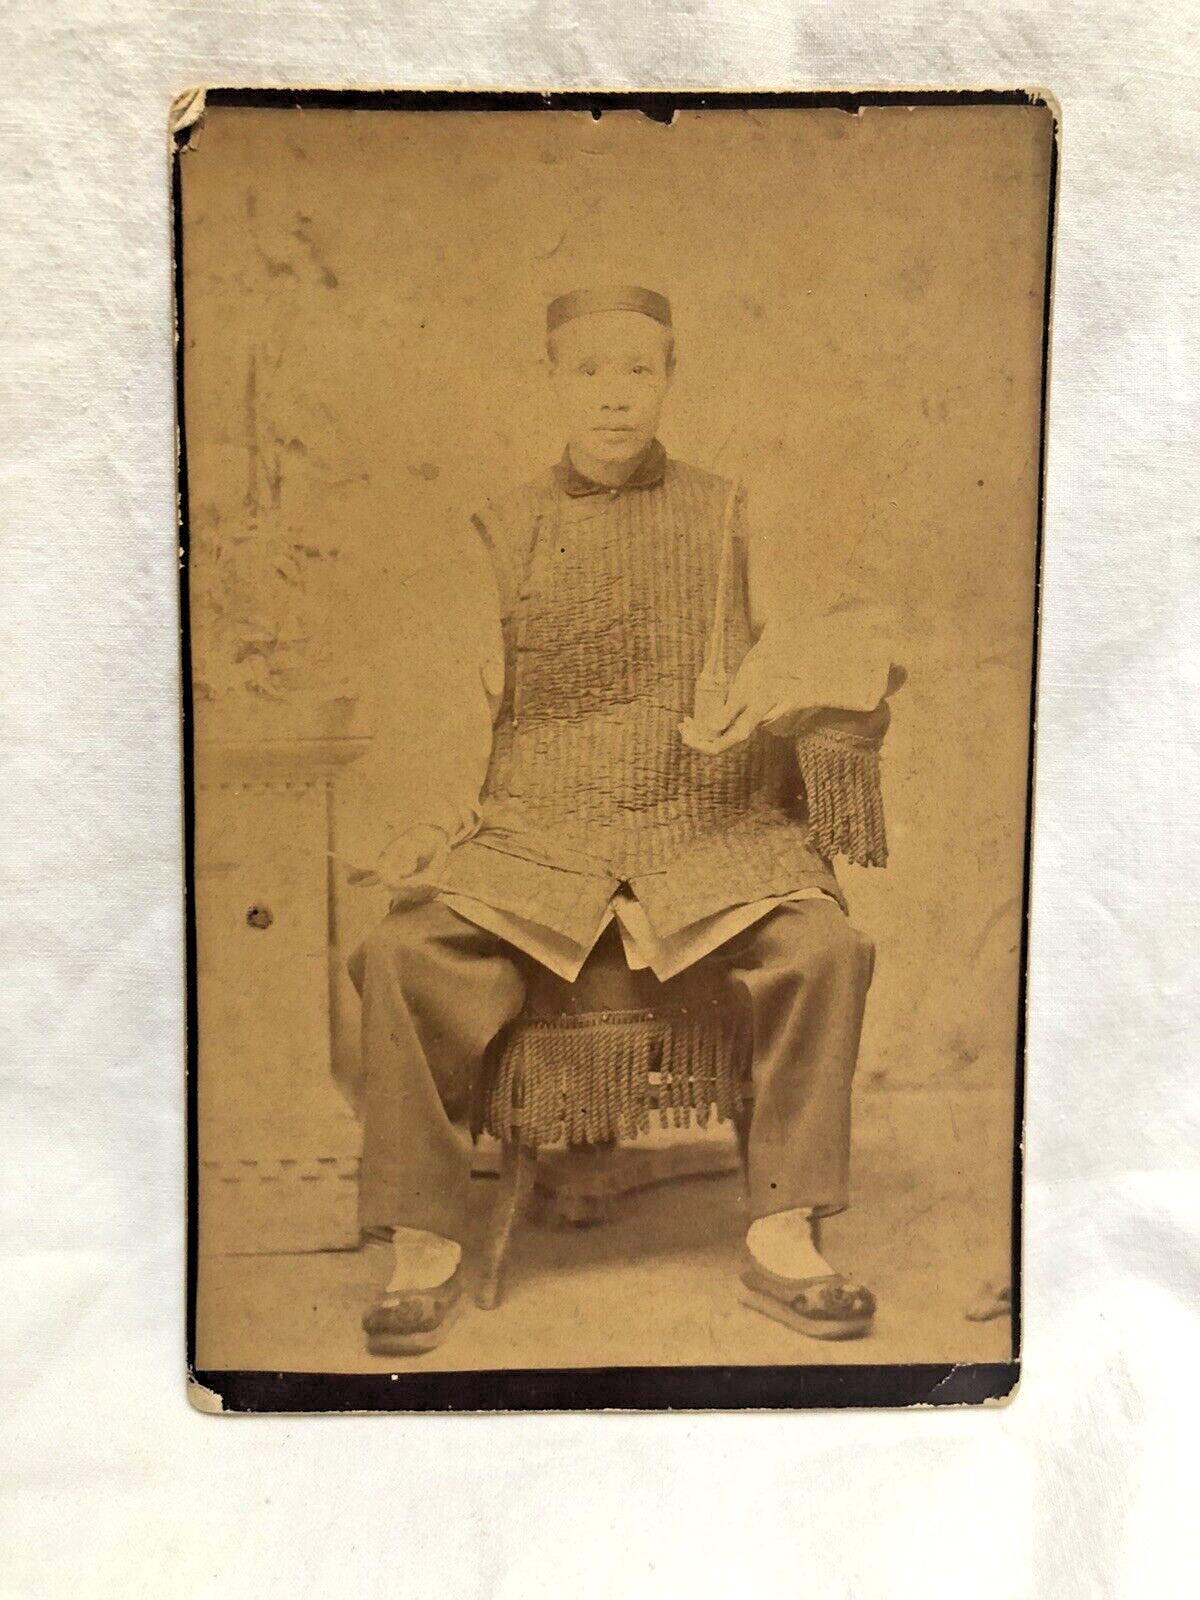 VINTAGE LATE 1800'S PHOTO CANINET CARD CHINESE PERSON WITH OPIUM PIPE RARE